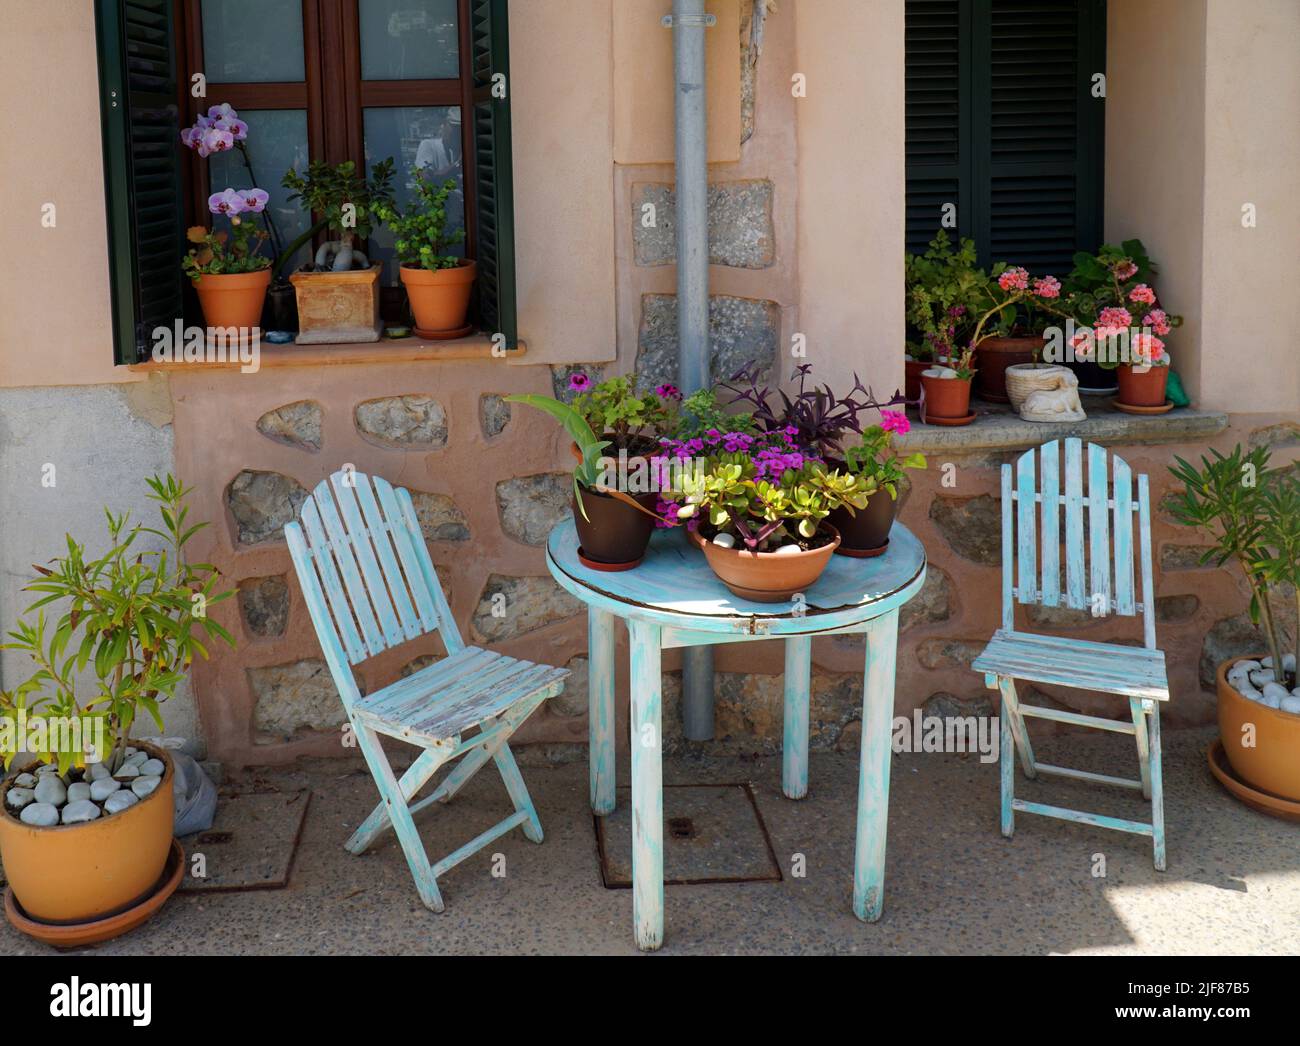 Plants in pots on window sills and old table chairs in informal display. Stock Photo